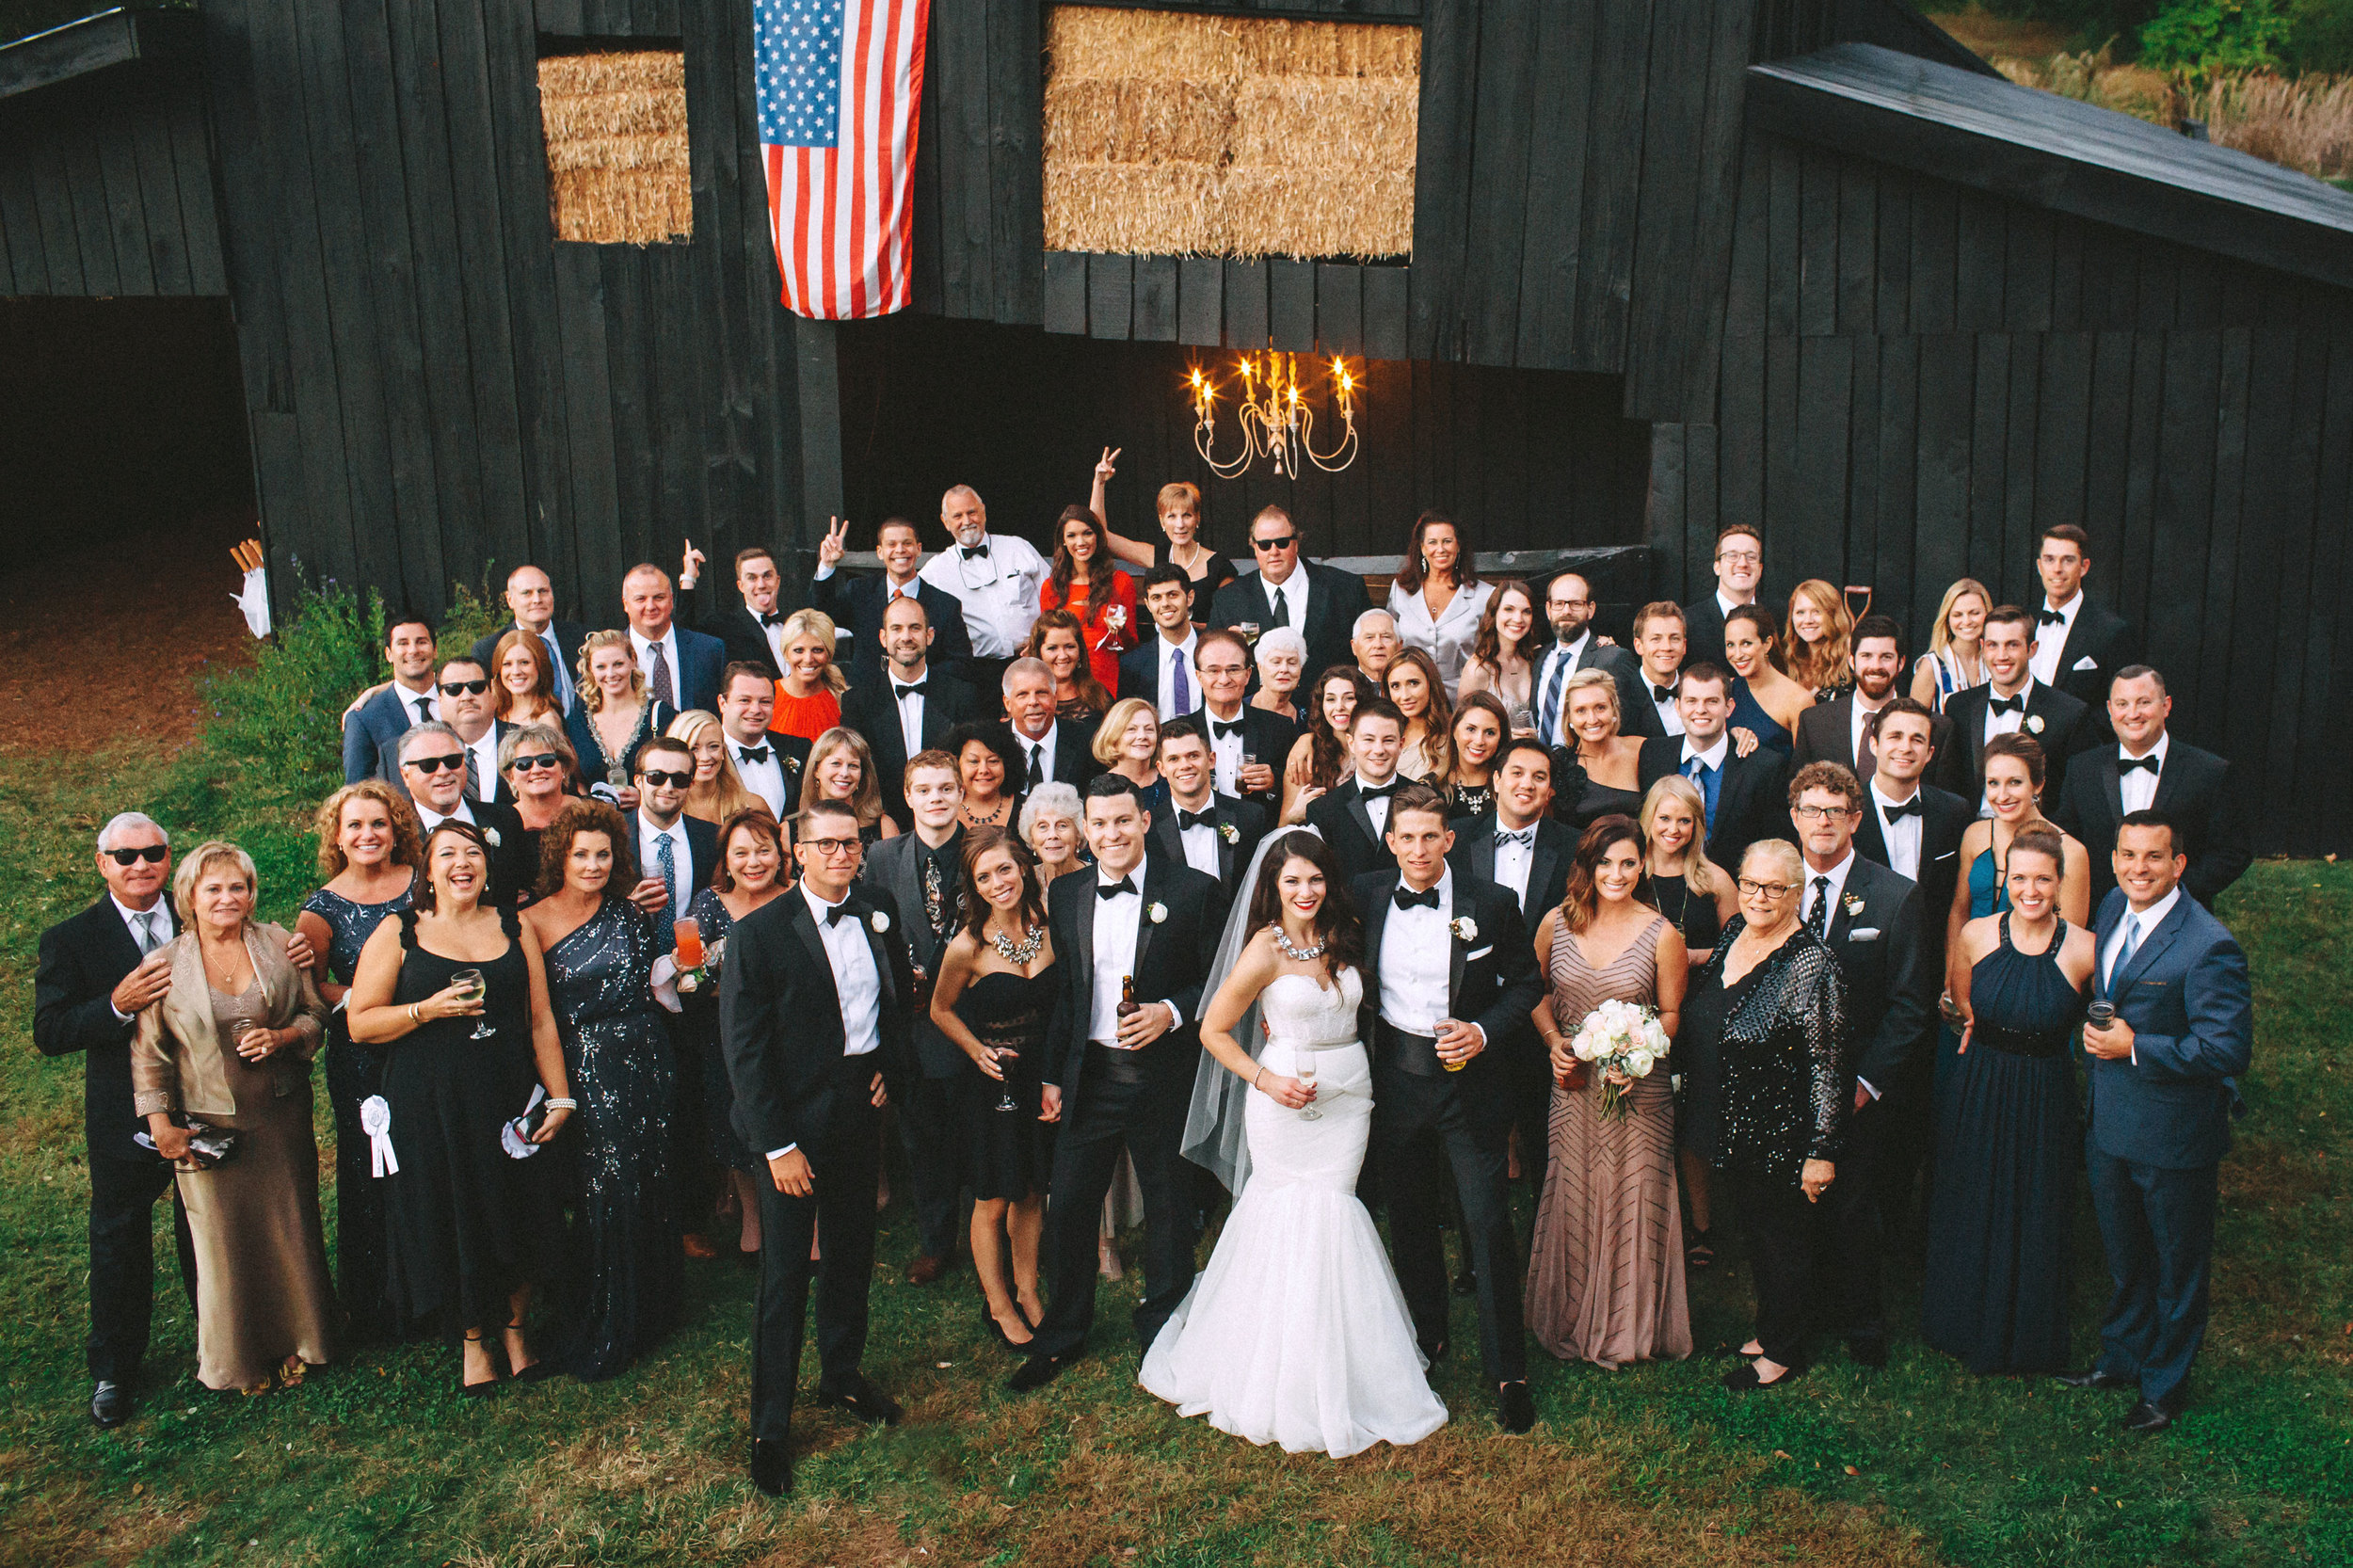 Me & Mr. Jones Wedding, Rustic Glam, Cocktail Hour in the Barn at Cedarwood in Nashville, Small Wedding Group Photo